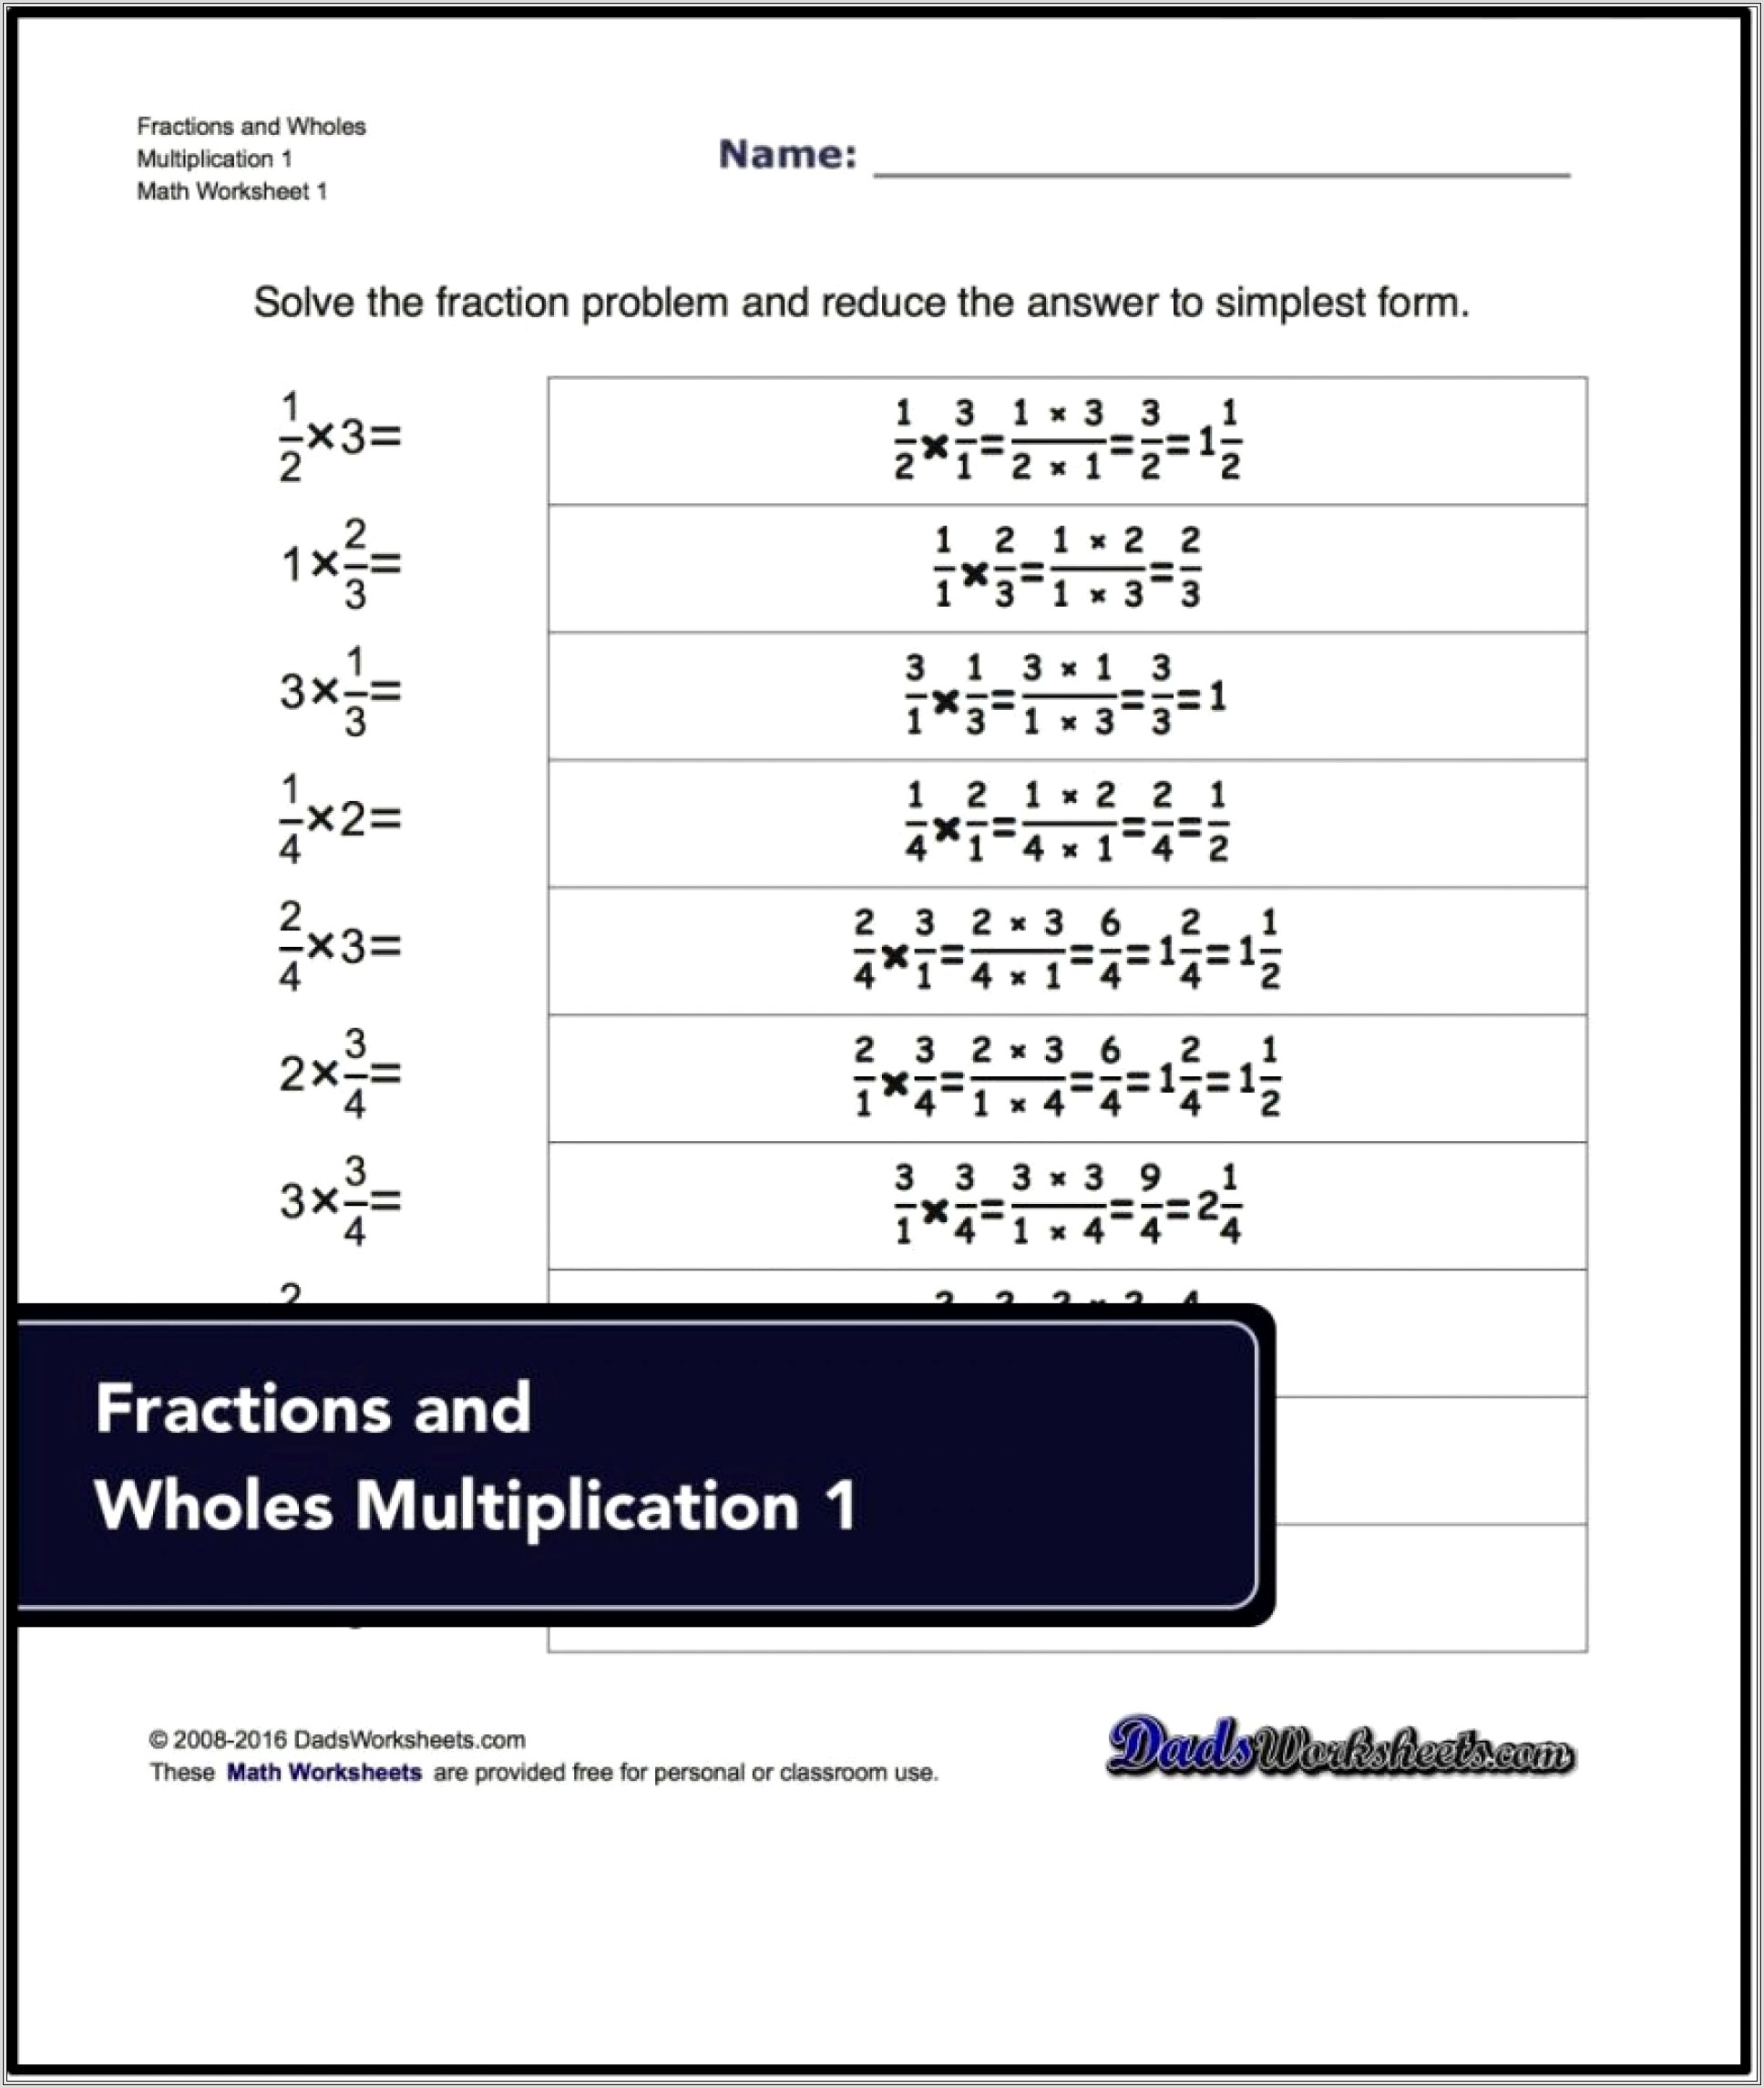 Famous Ocean Liner Math Worksheet Answers